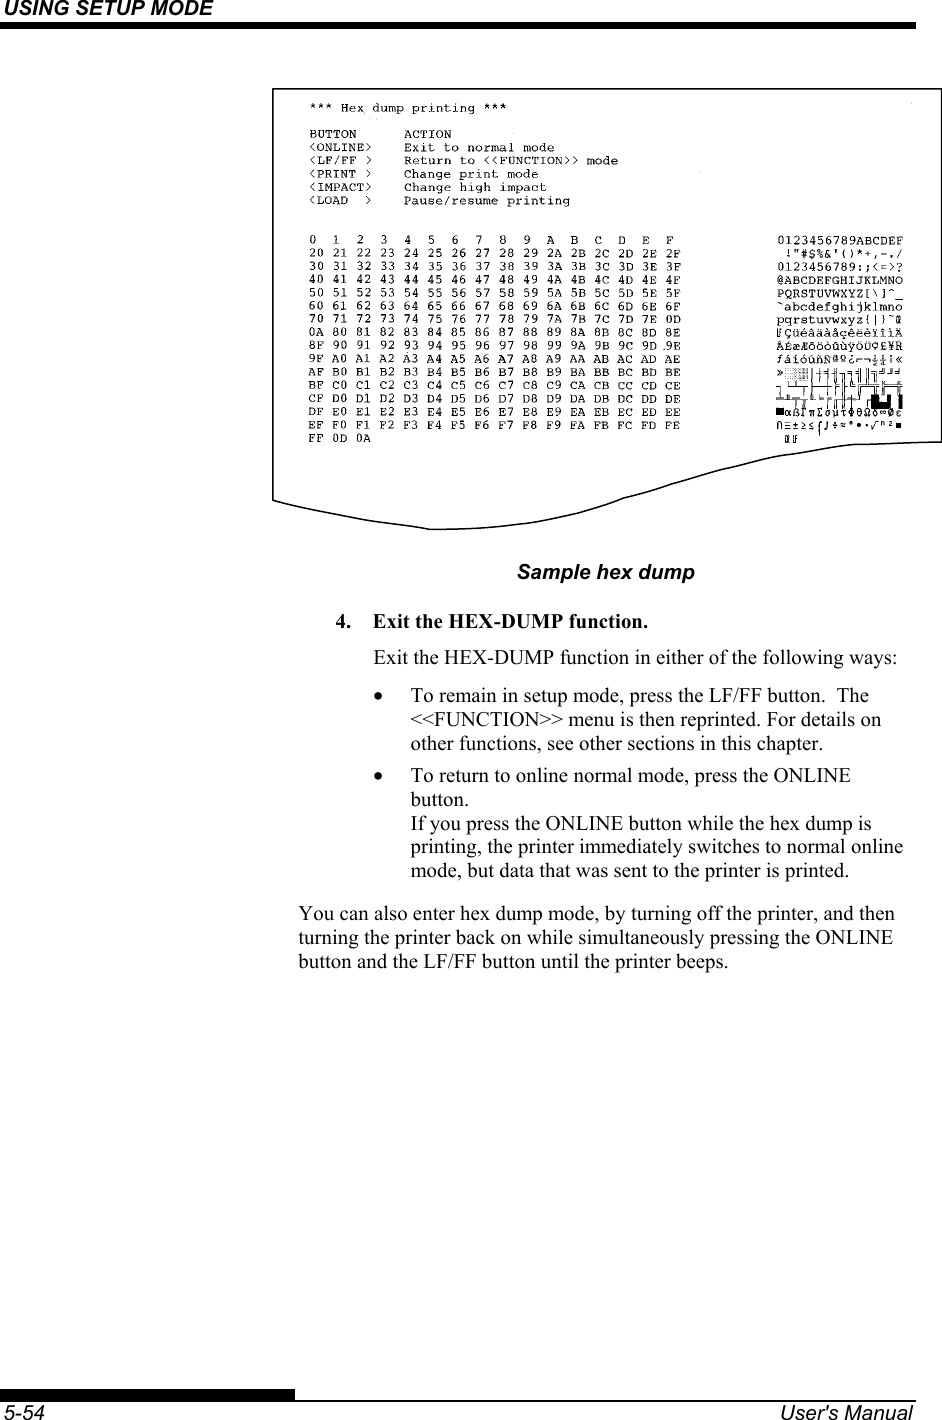 USING SETUP MODE    5-54  User&apos;s Manual    Sample hex dump 4.  Exit the HEX-DUMP function. Exit the HEX-DUMP function in either of the following ways: •  To remain in setup mode, press the LF/FF button.  The &lt;&lt;FUNCTION&gt;&gt; menu is then reprinted. For details on other functions, see other sections in this chapter. •  To return to online normal mode, press the ONLINE button. If you press the ONLINE button while the hex dump is printing, the printer immediately switches to normal online mode, but data that was sent to the printer is printed. You can also enter hex dump mode, by turning off the printer, and then turning the printer back on while simultaneously pressing the ONLINE button and the LF/FF button until the printer beeps. 